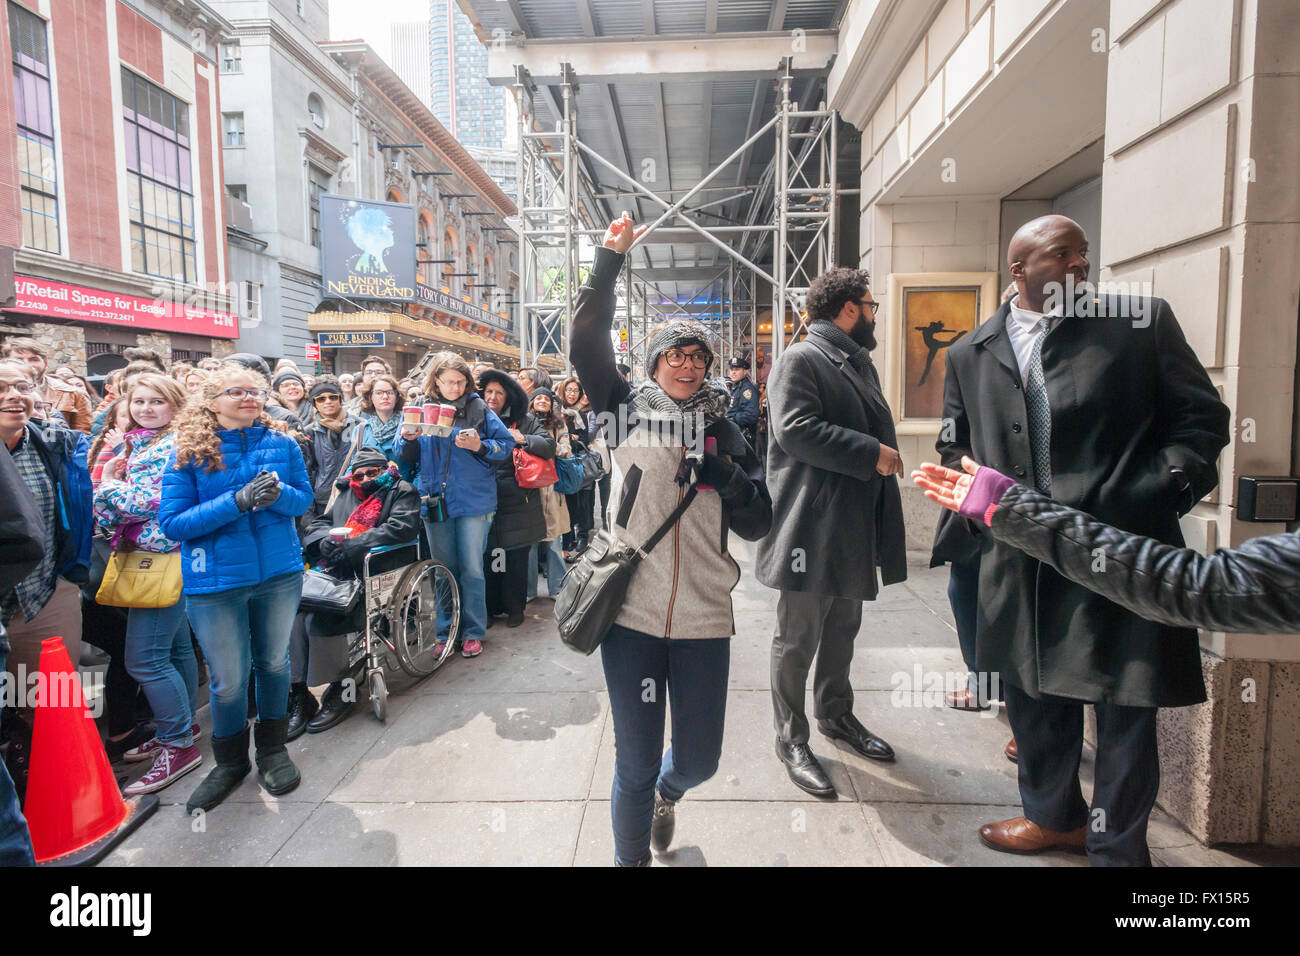 A winner comes forward at the Richard Rodgers Theatre in Times Square in New York on Wednesday, April 6, 2016 after her name is called for tickets in the #Ham4Ham lottery for seats for the Broadway blockbuster 'Hamilton'. The $10 live lottery takes place in front of the theater for the Wednesday matinee performance while for the rest of the week's performances the lottery is online. (© Richard B. Levine) Stock Photo